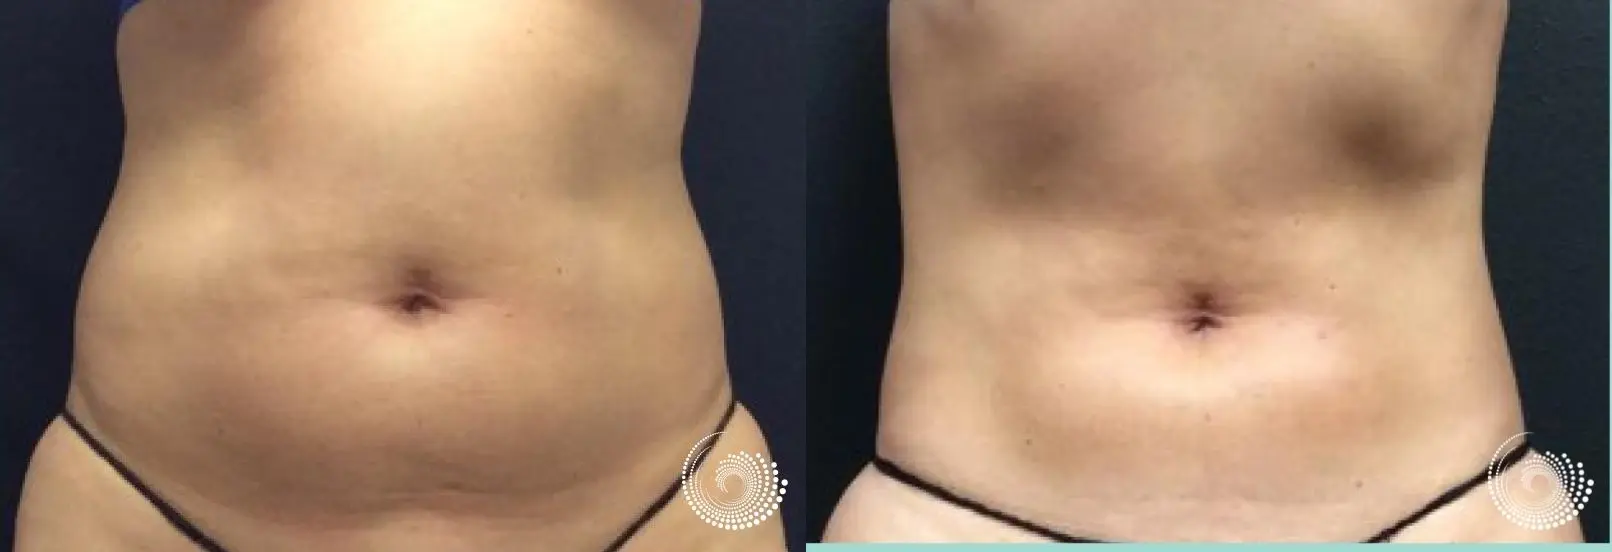 CoolSculpting Before and After Picture of Back Fat and Stomach